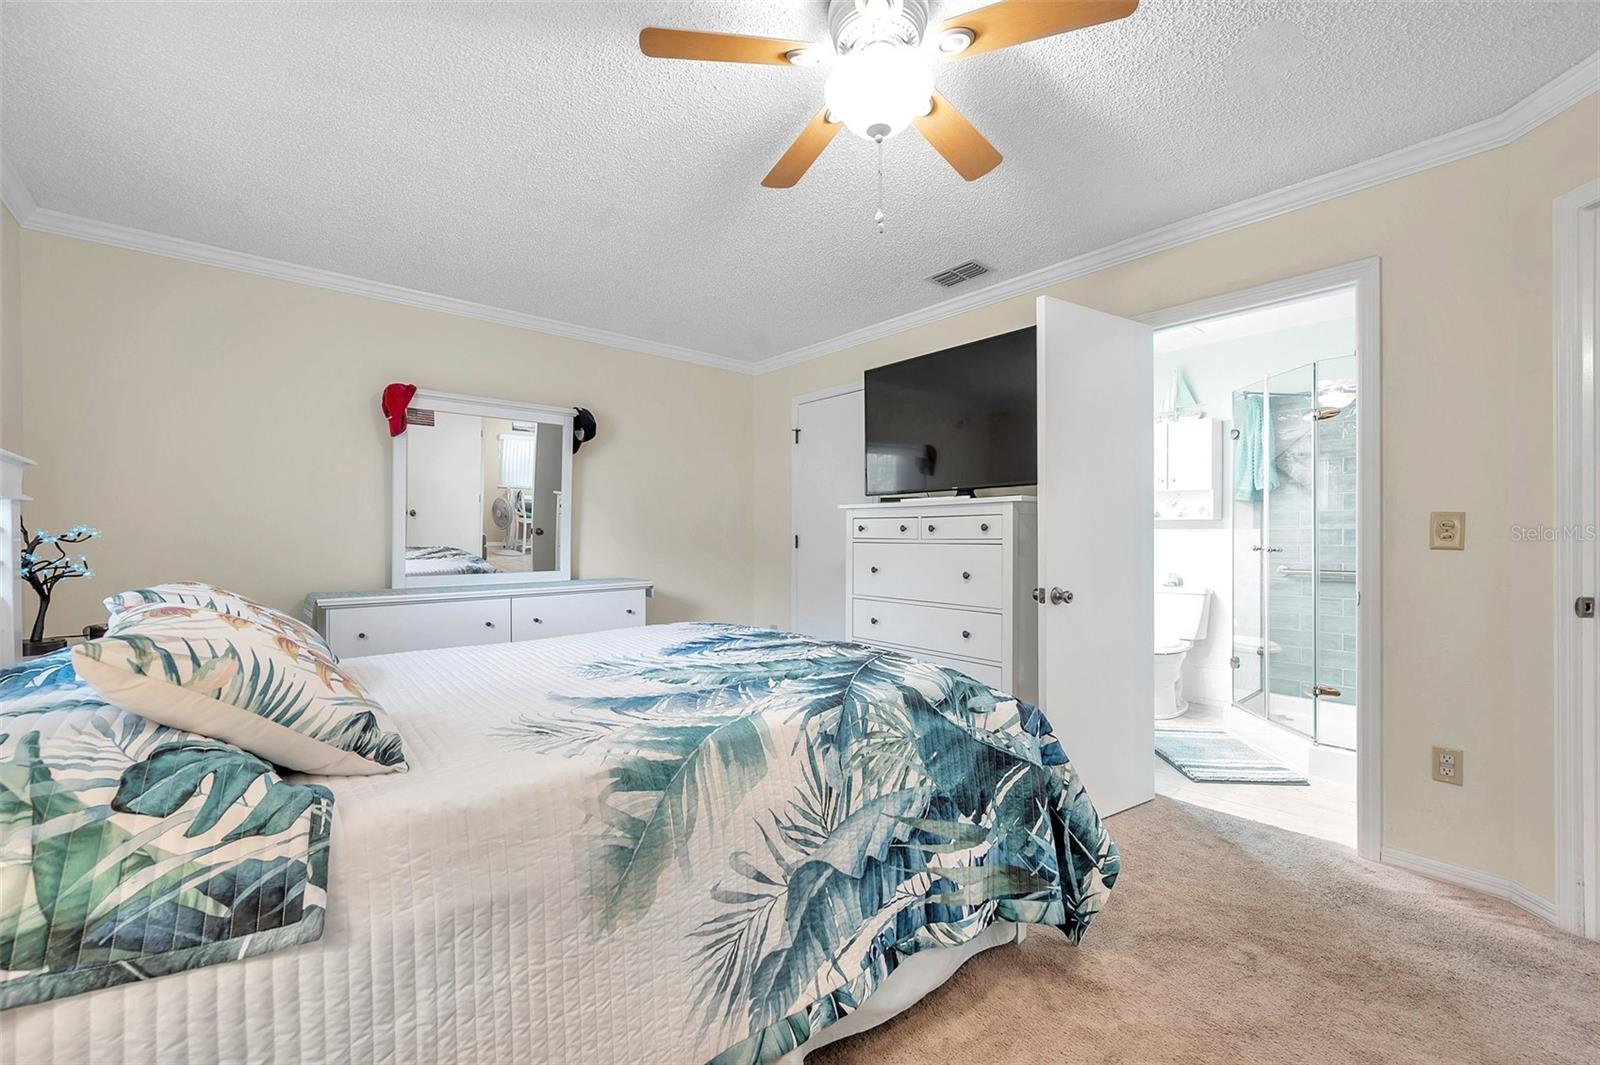 Primary bedroom has a ceiling fan with light, crown molding and neutral color paint.